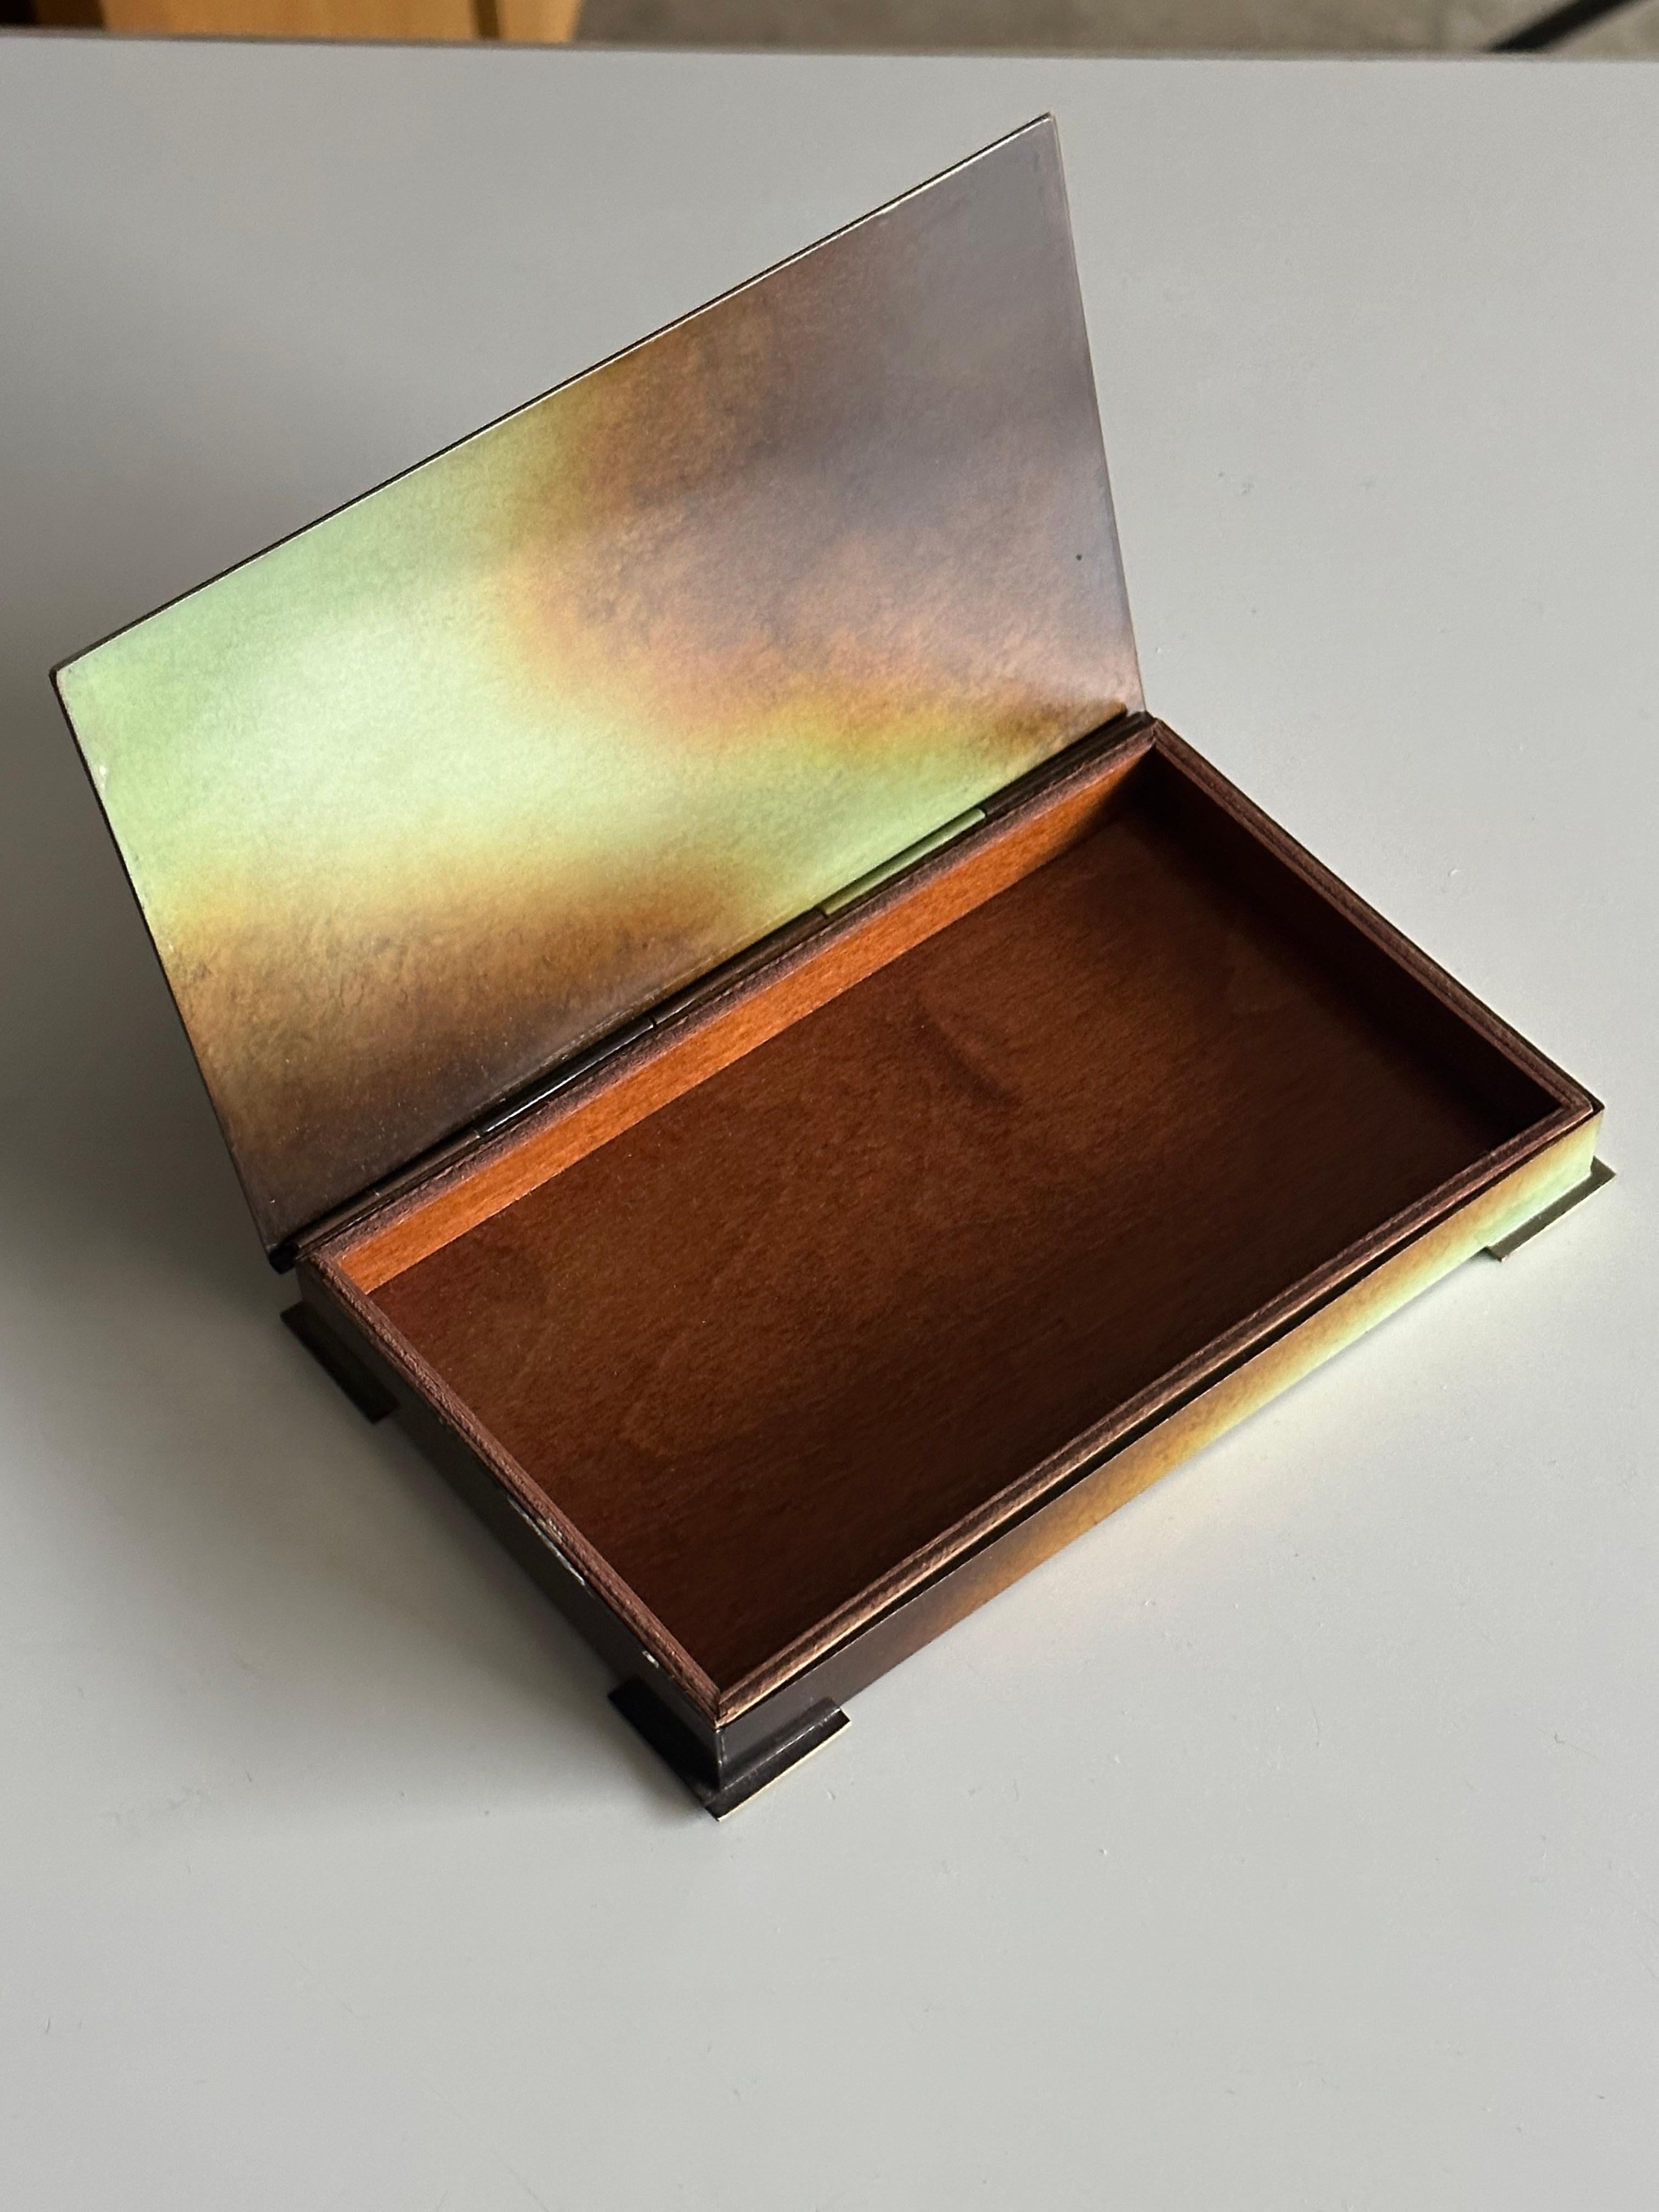 Mid-20th Century Swedish Lidded Box in Bronze & Wood by Bernhard Linder for Metallkonst 1950’s For Sale